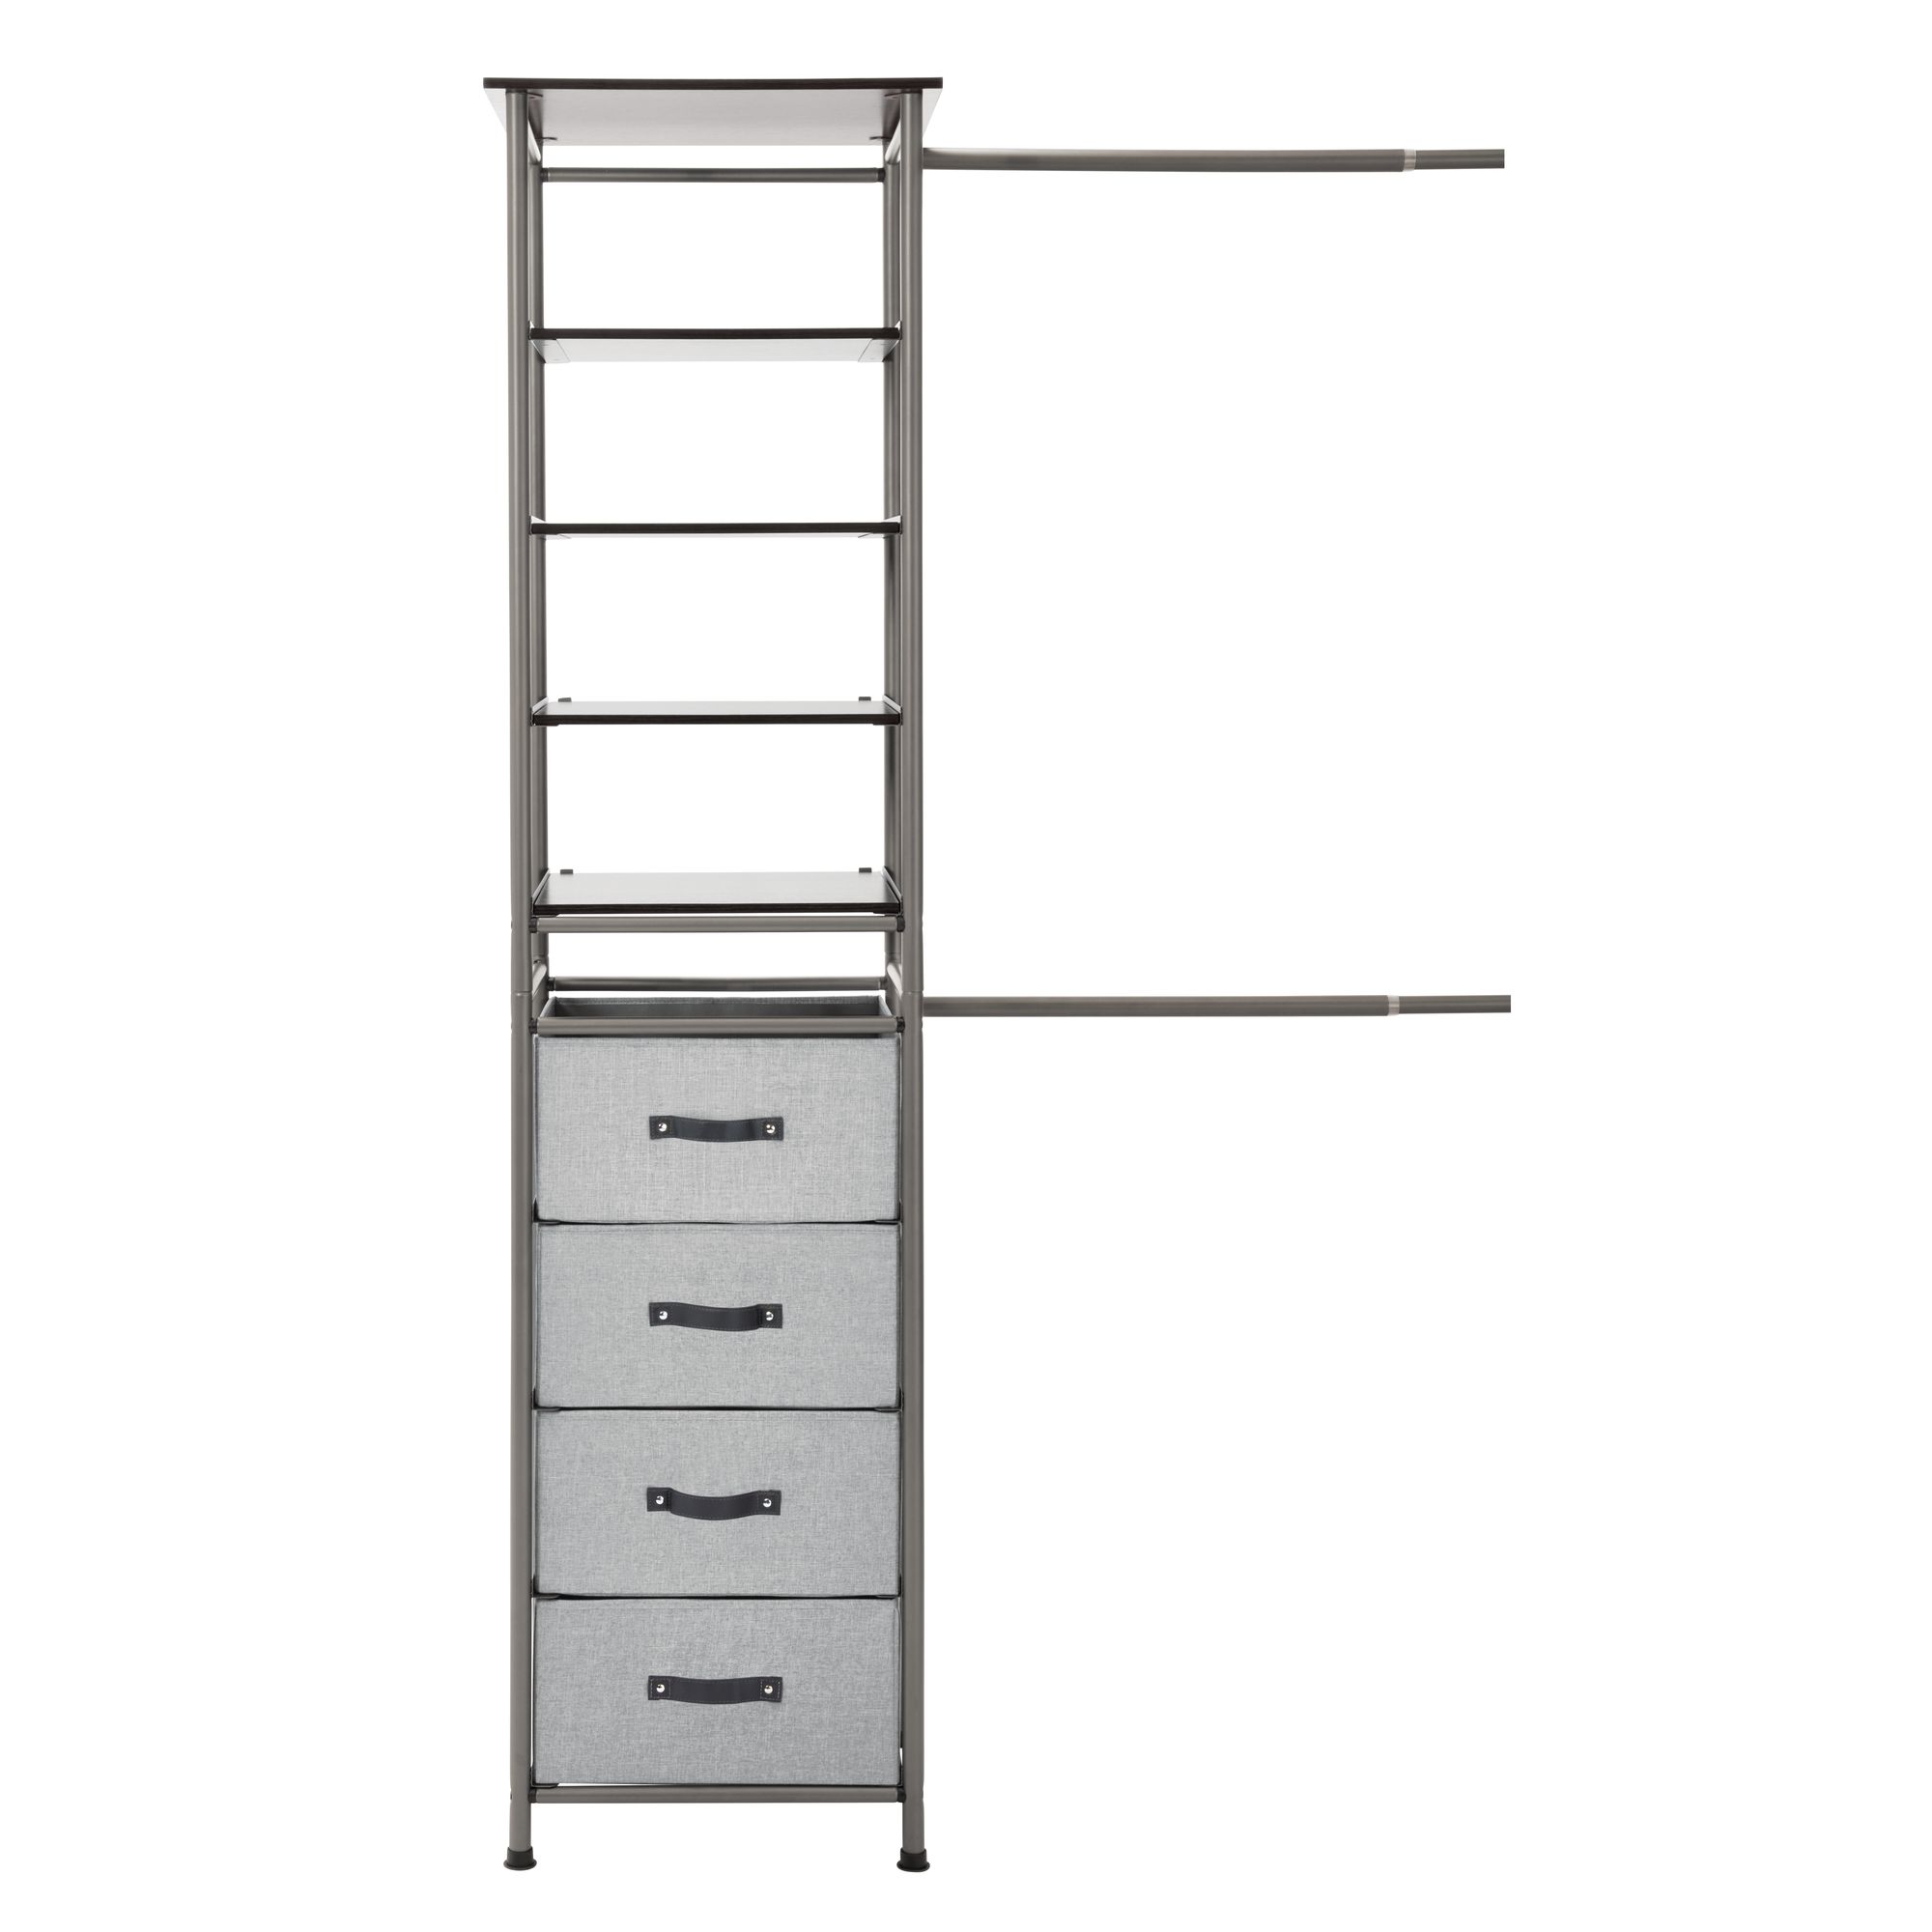 iDesign Modular Storage System, Closet with Hanging Rack, Drawers, and Shelves - Graphite - image 4 of 10